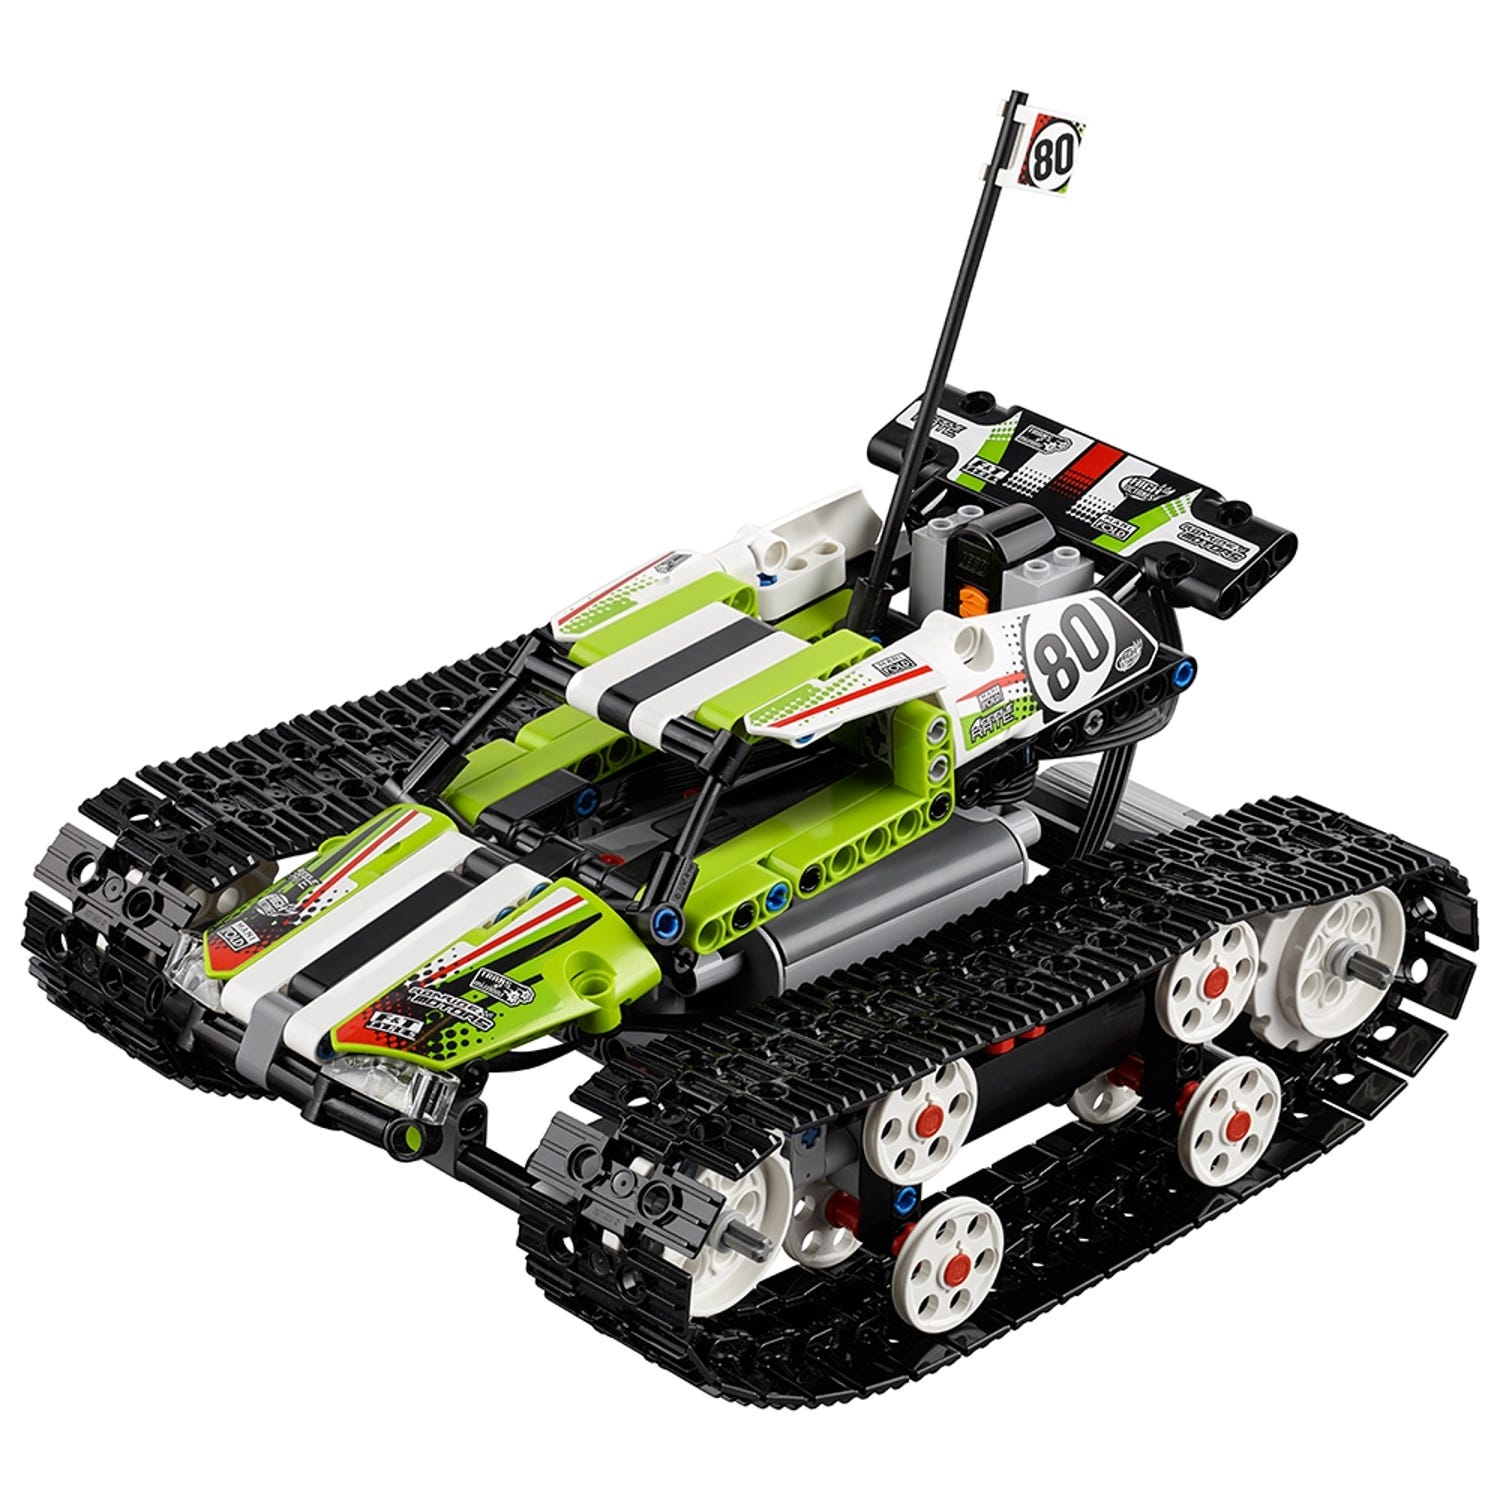 RC Tracked Racer 42065 | Technic™ | Buy online at the Official LEGO® Shop US